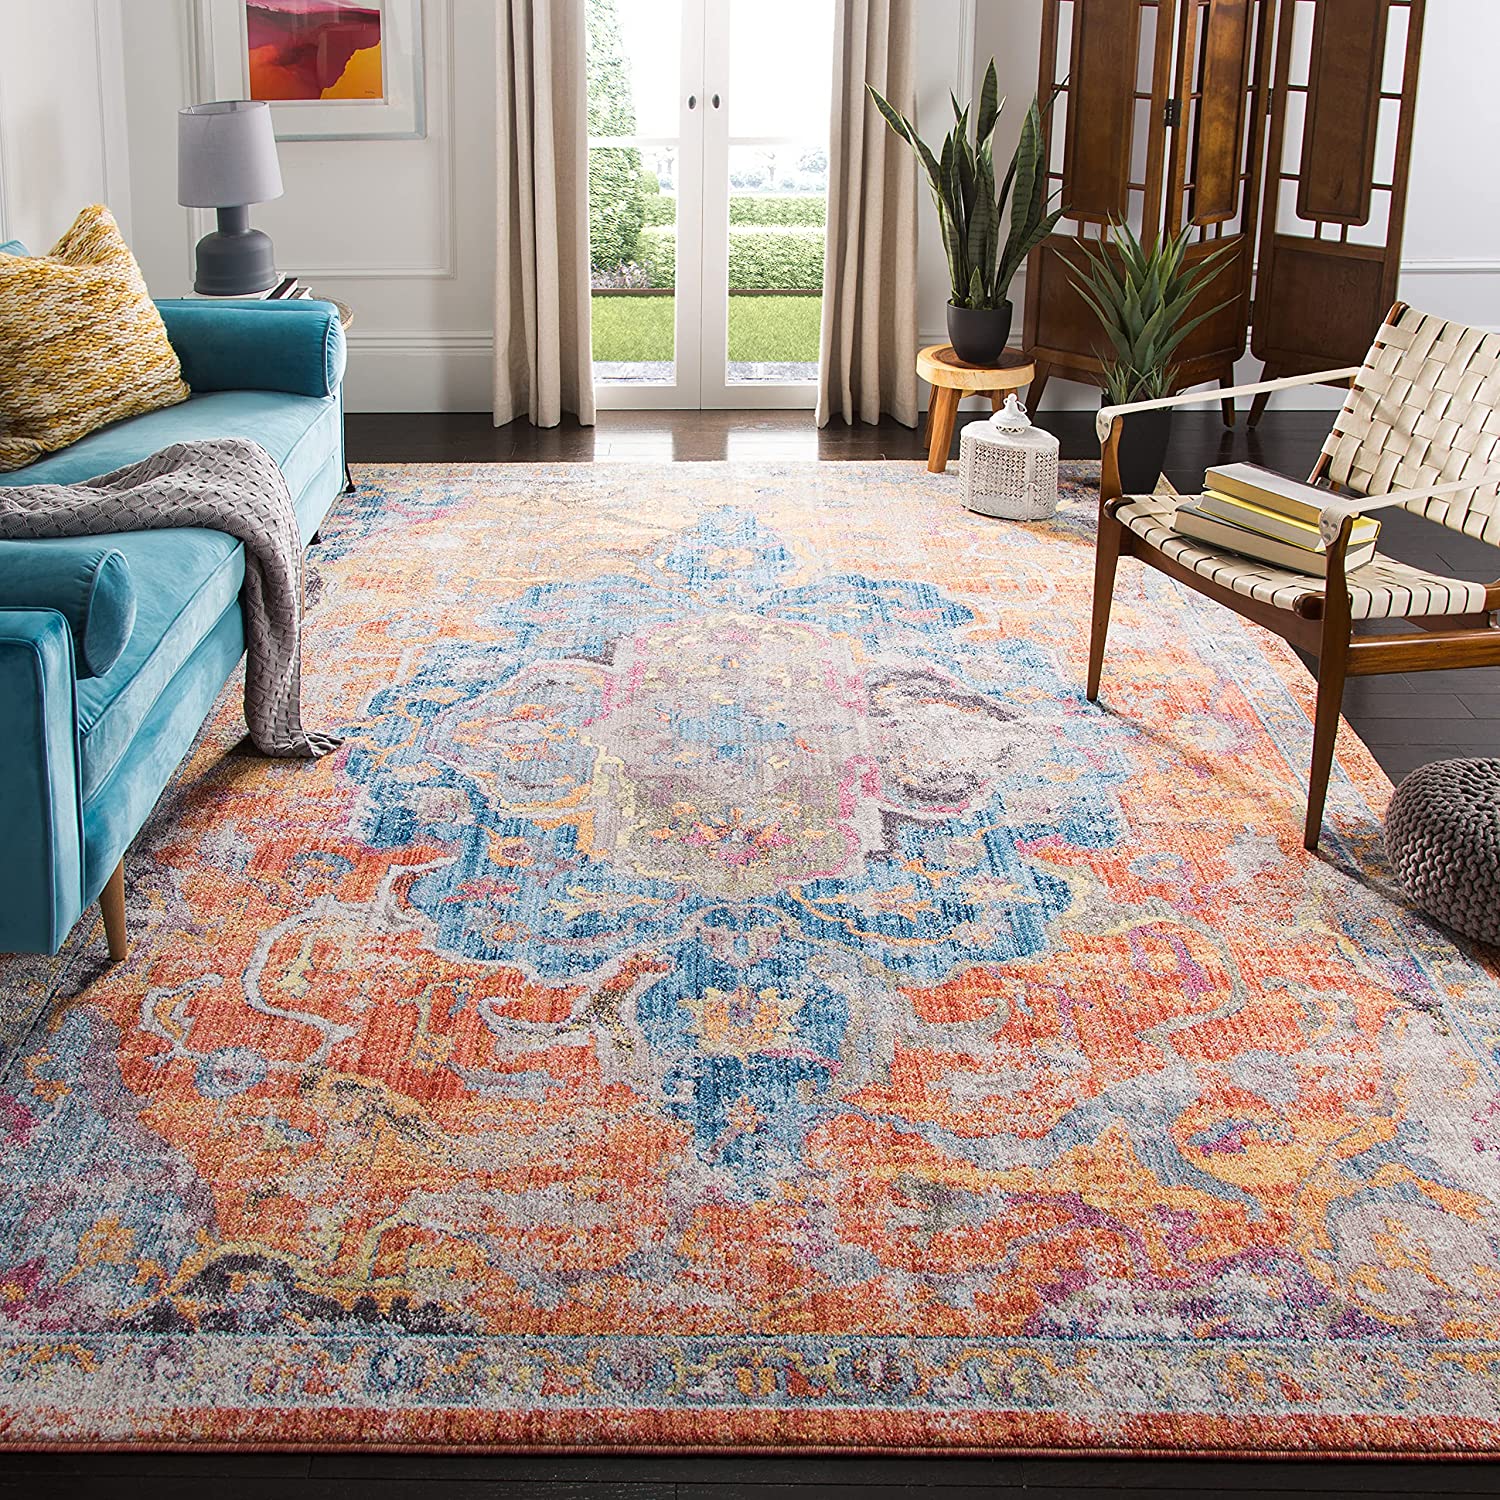 15 Beautiful Rugs That Go With Blue, What Color Rug Goes With Navy Sofa